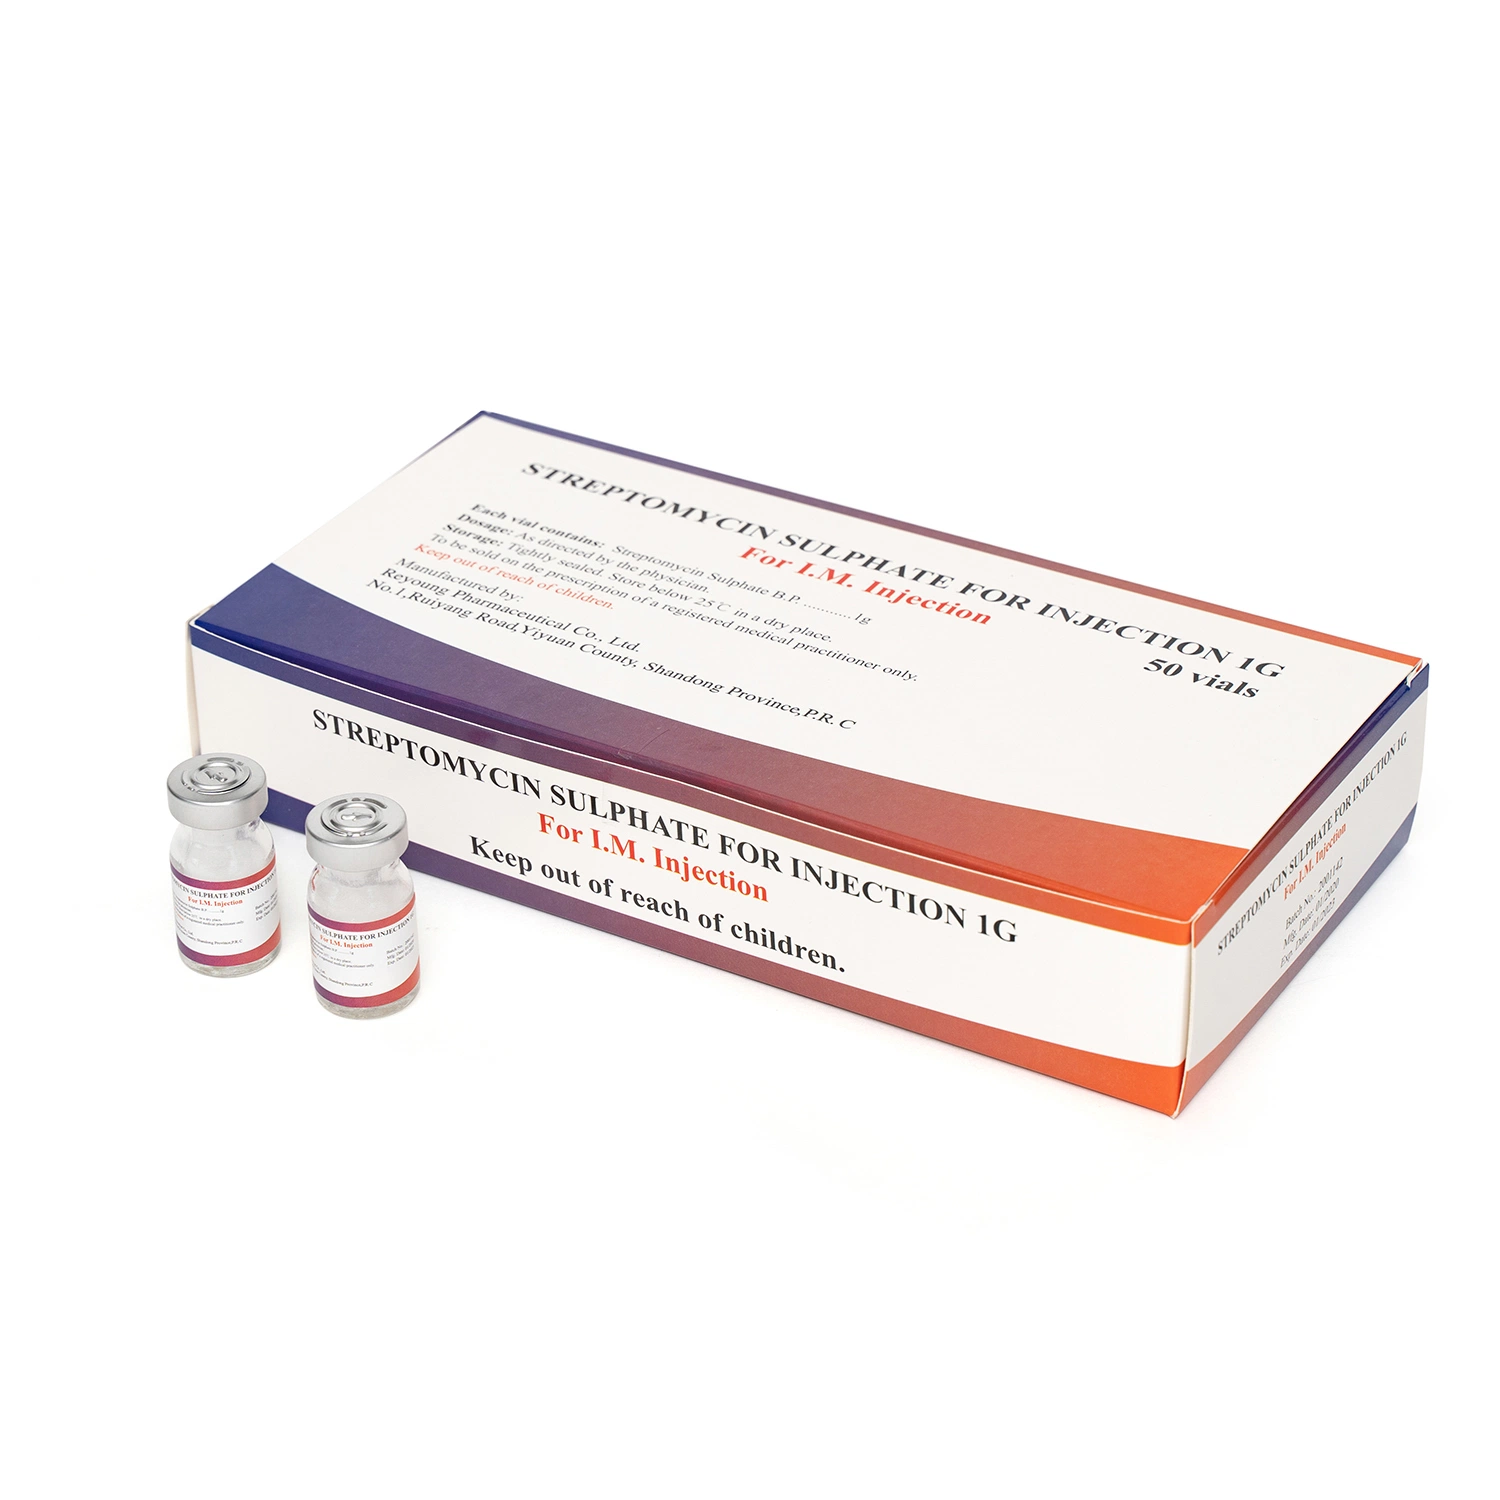 High Quality of Streptomycin Sulfate for Injection with Good Price